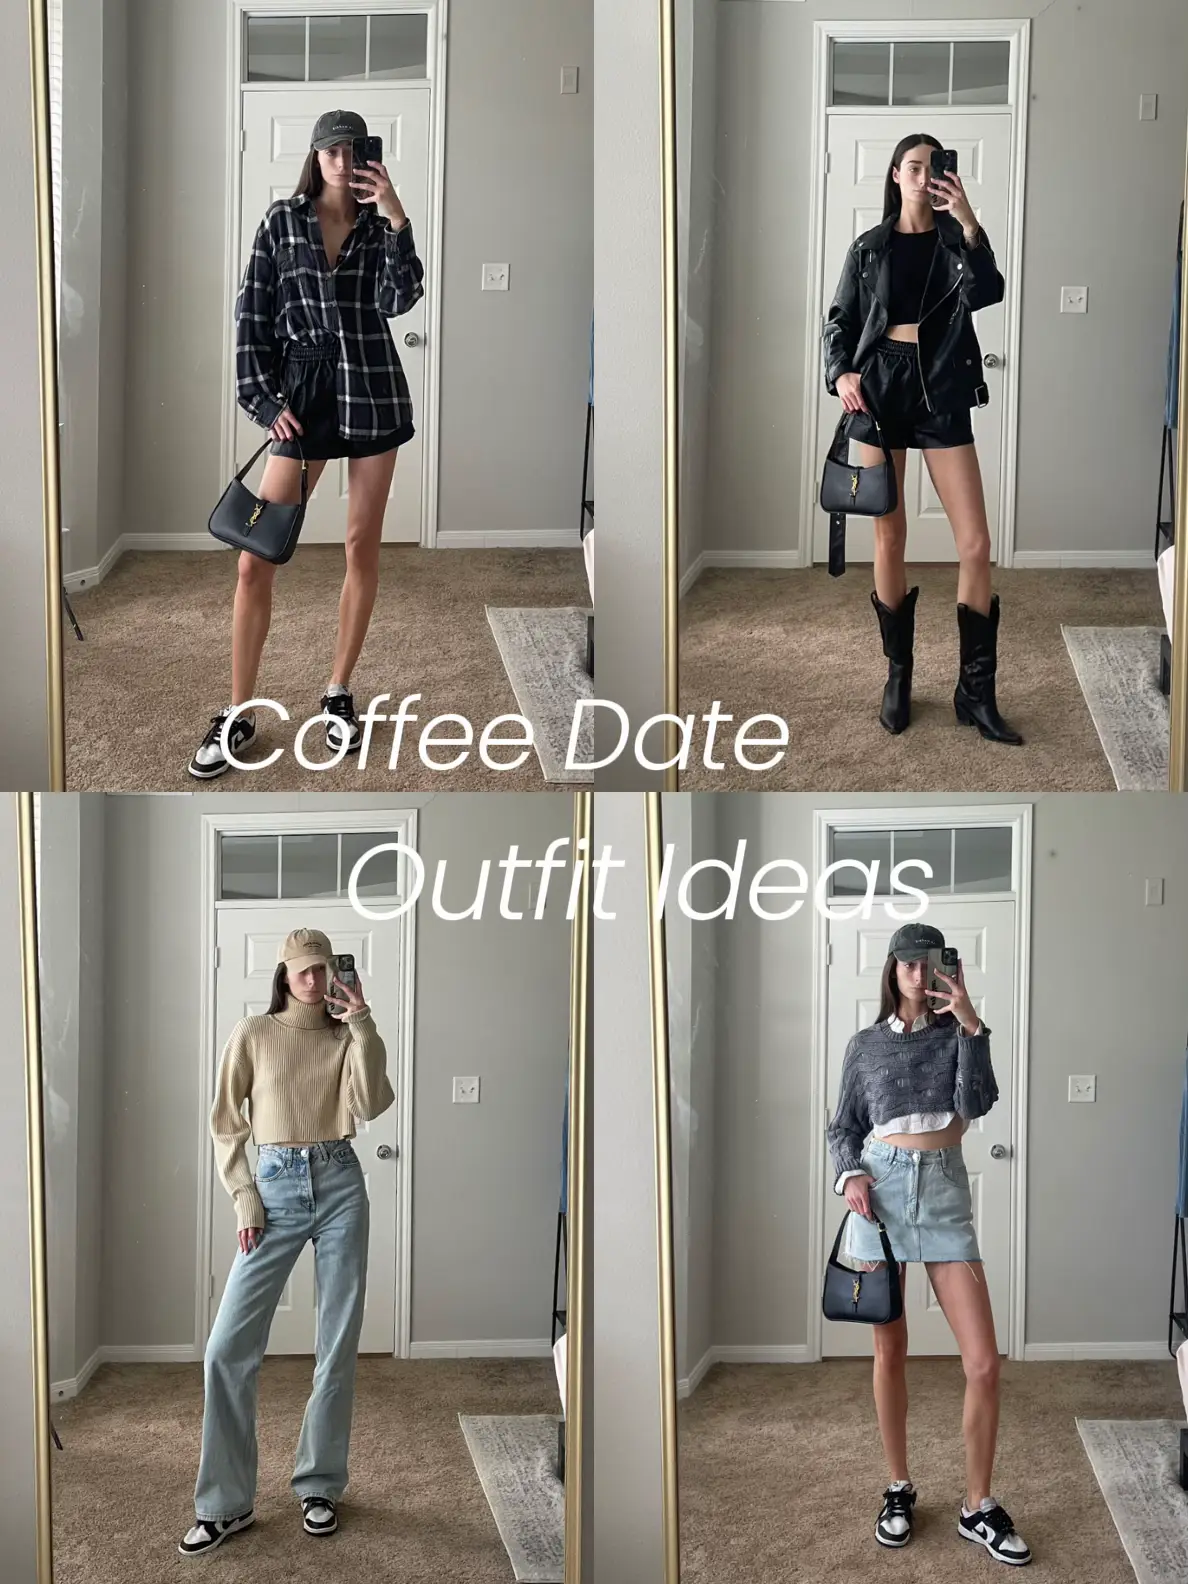 Coffee Date Outfit Ideas ☕️, Gallery posted by Millicentrose